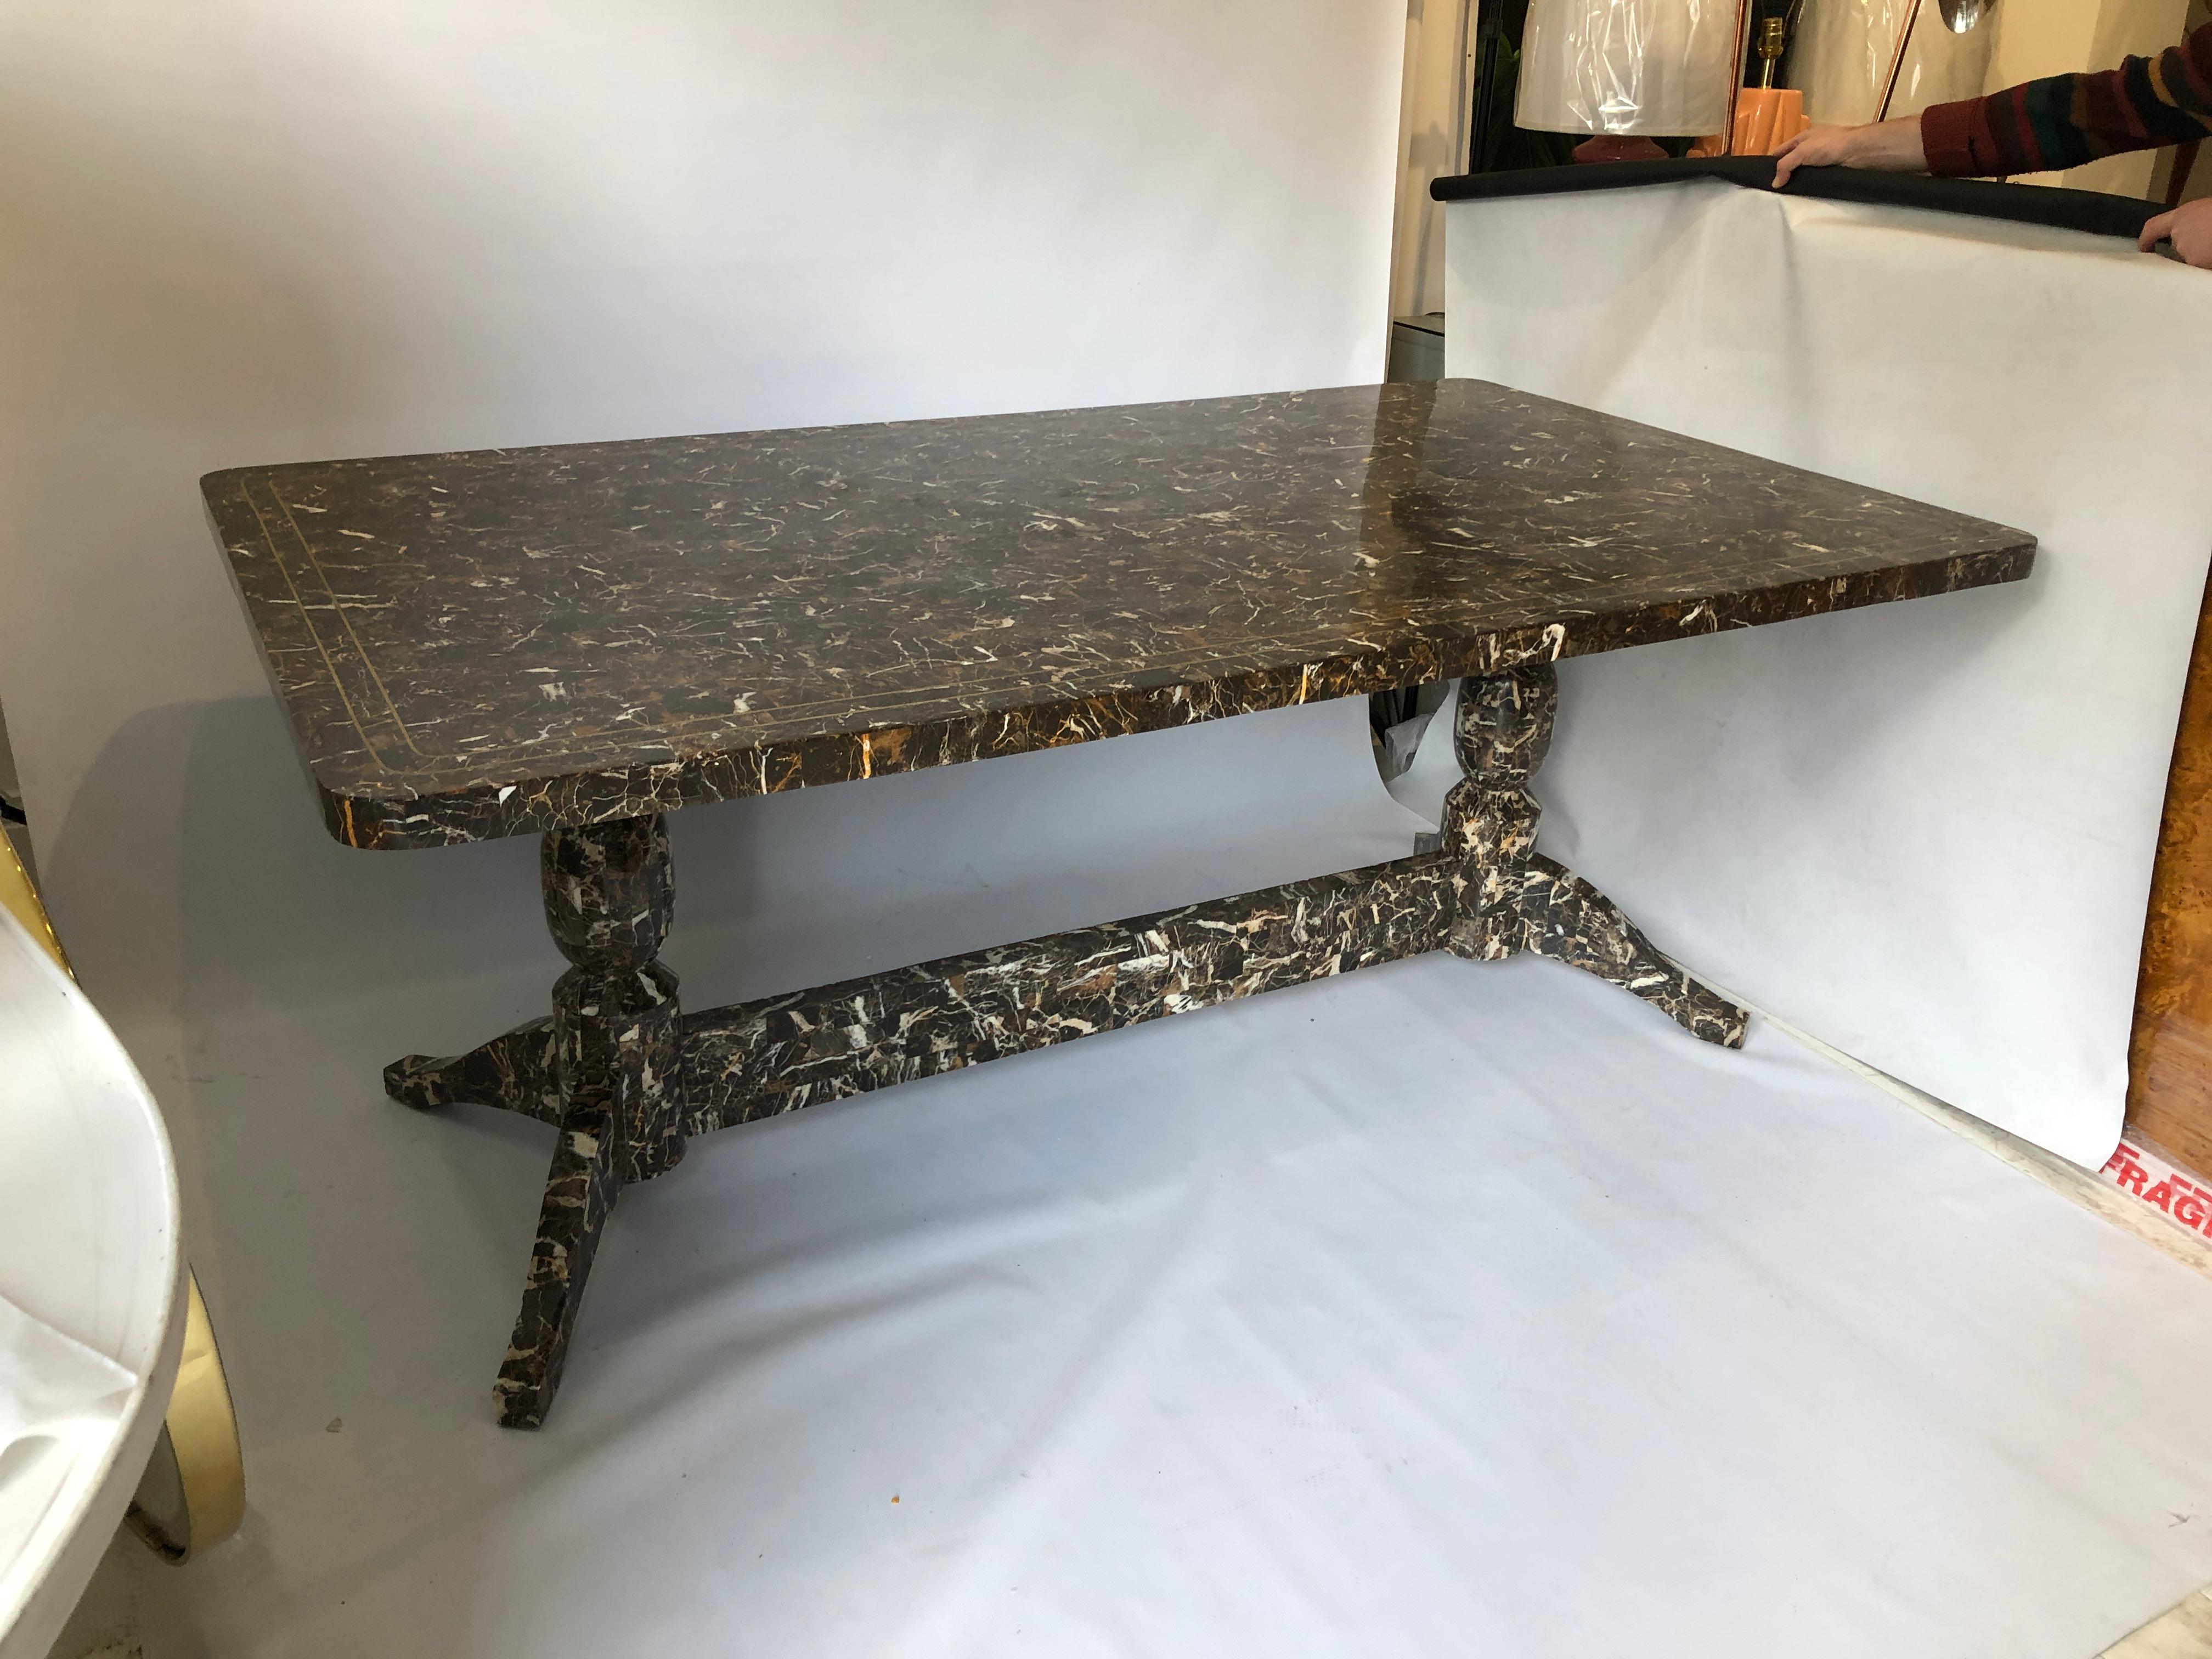 A beautifully 1980s extra-large marble dining table from Maitland-Smith, the renowned American furniture company. This piece consists of tessellated Emperador marble rectangles, placed together to create a dazzling and distinct pattern surface of